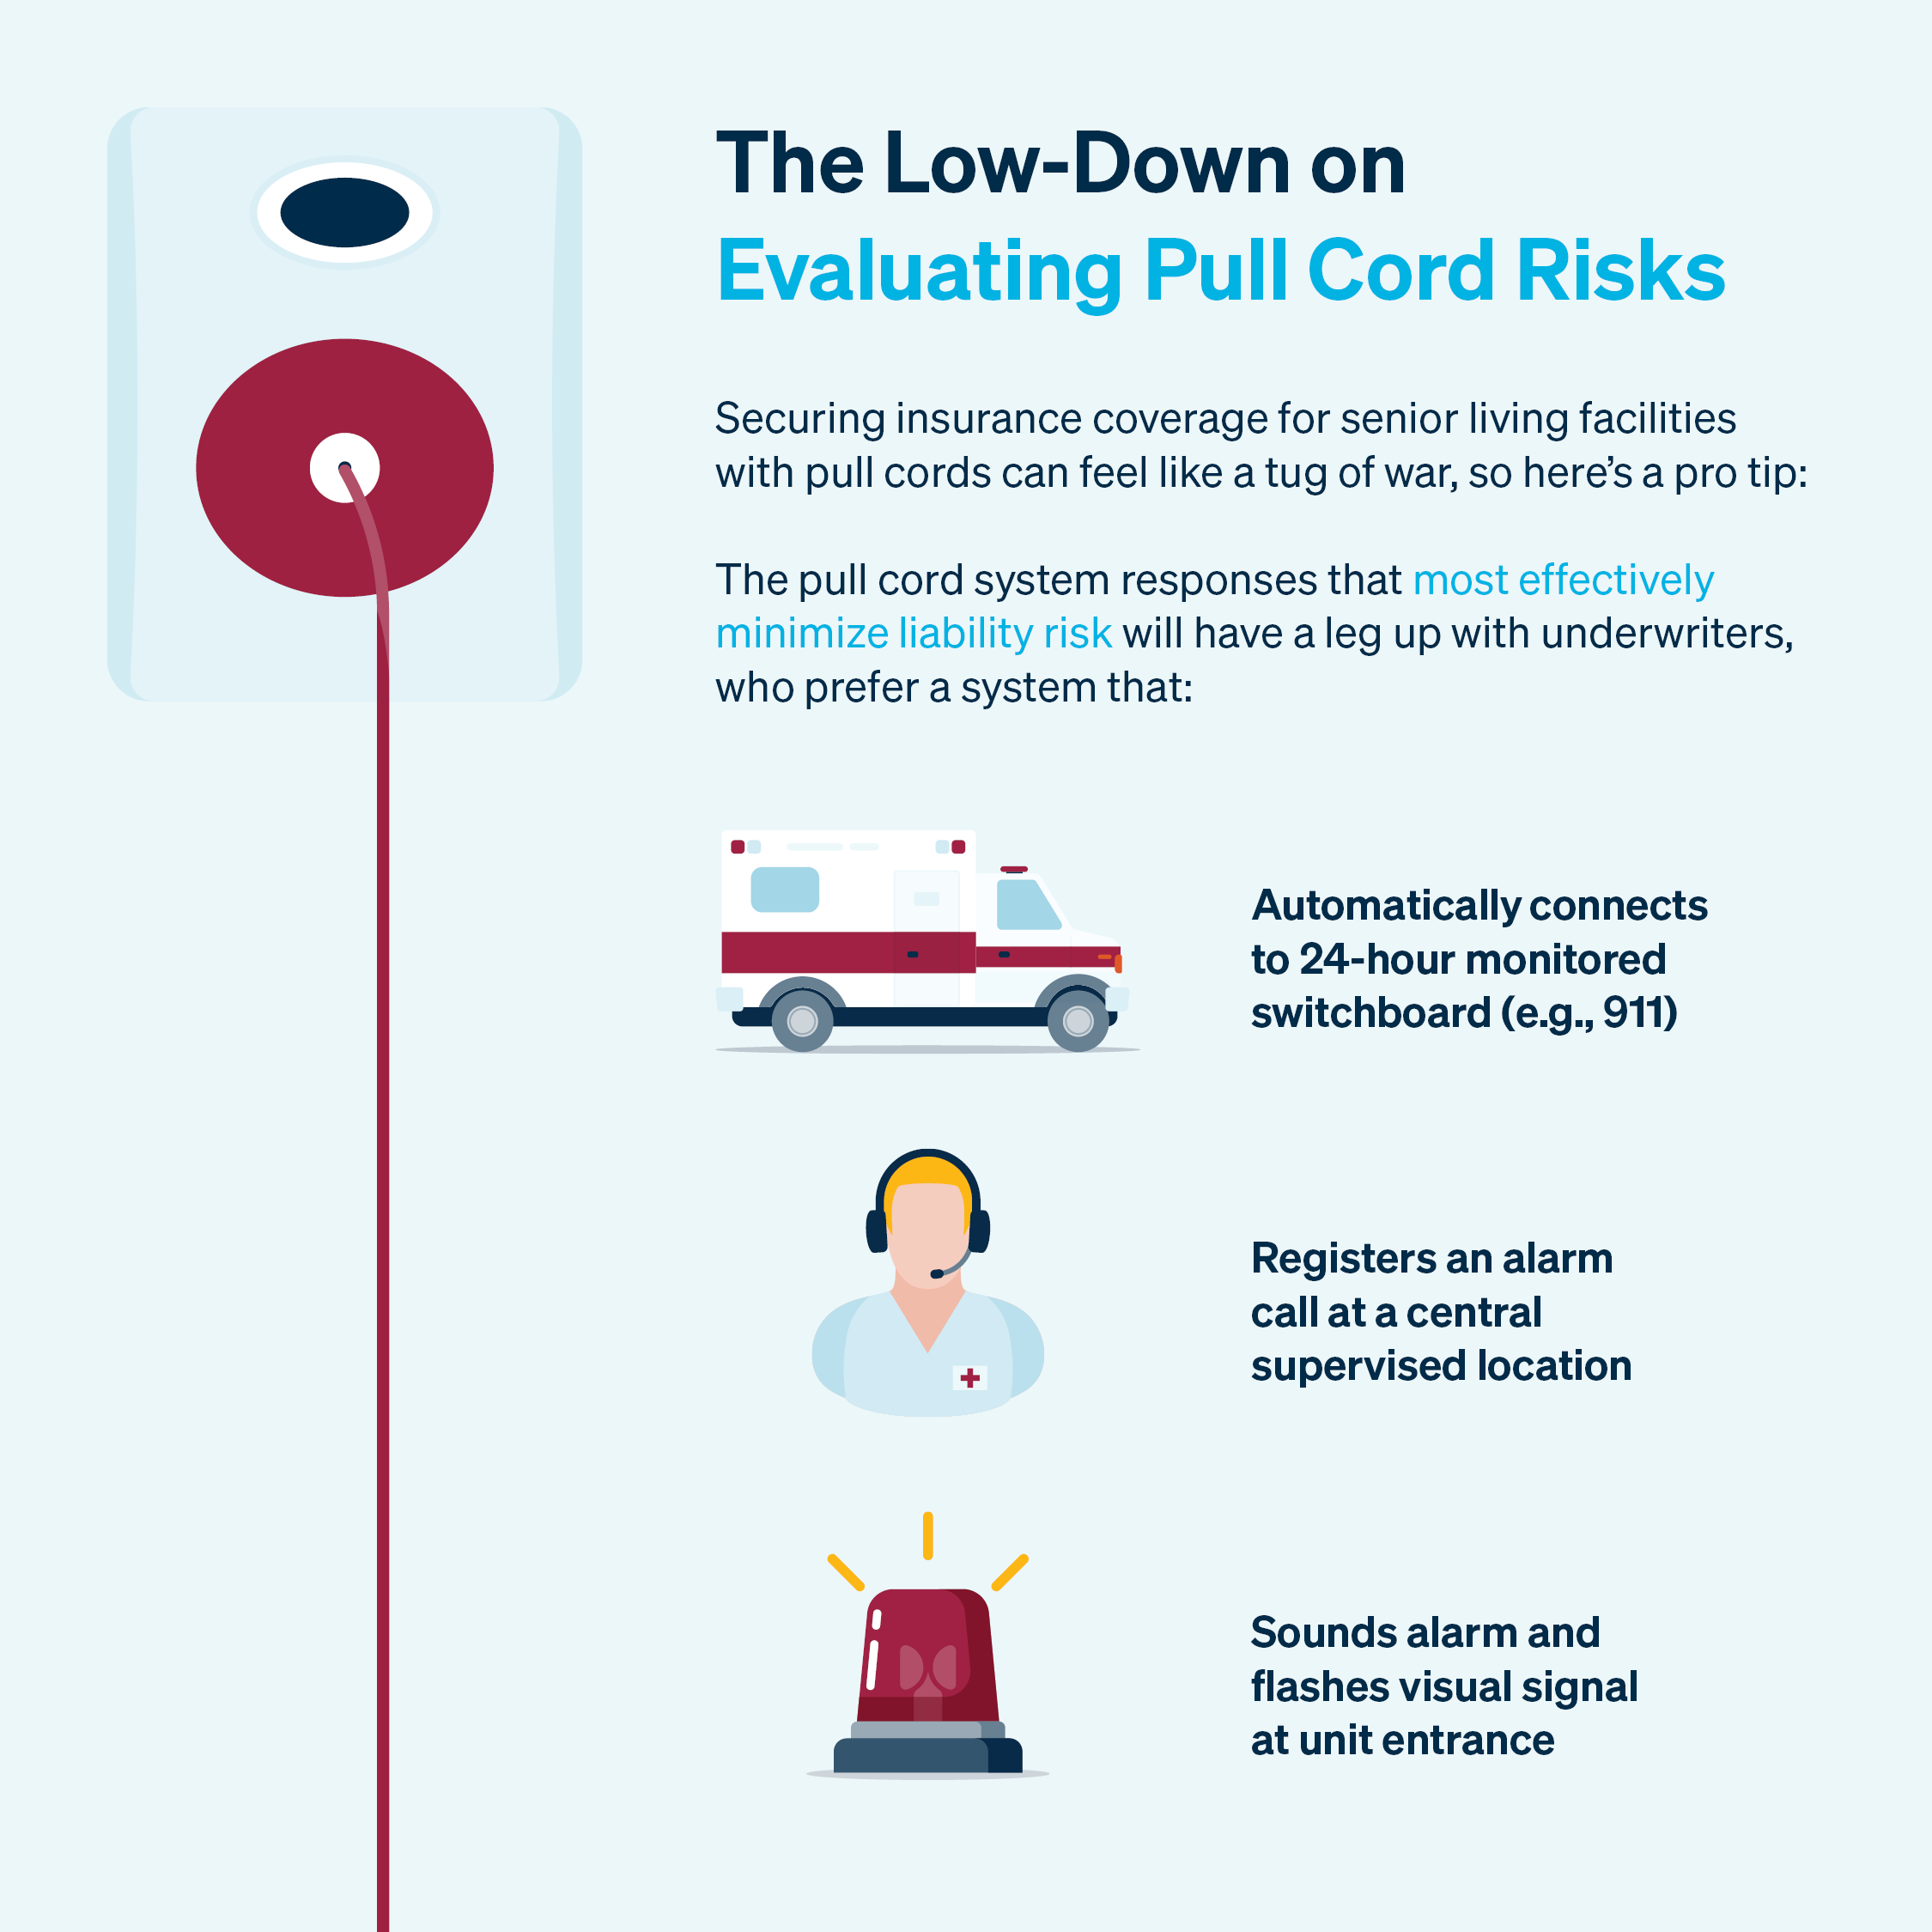 Evaluating Pull Cord Risks Infographic